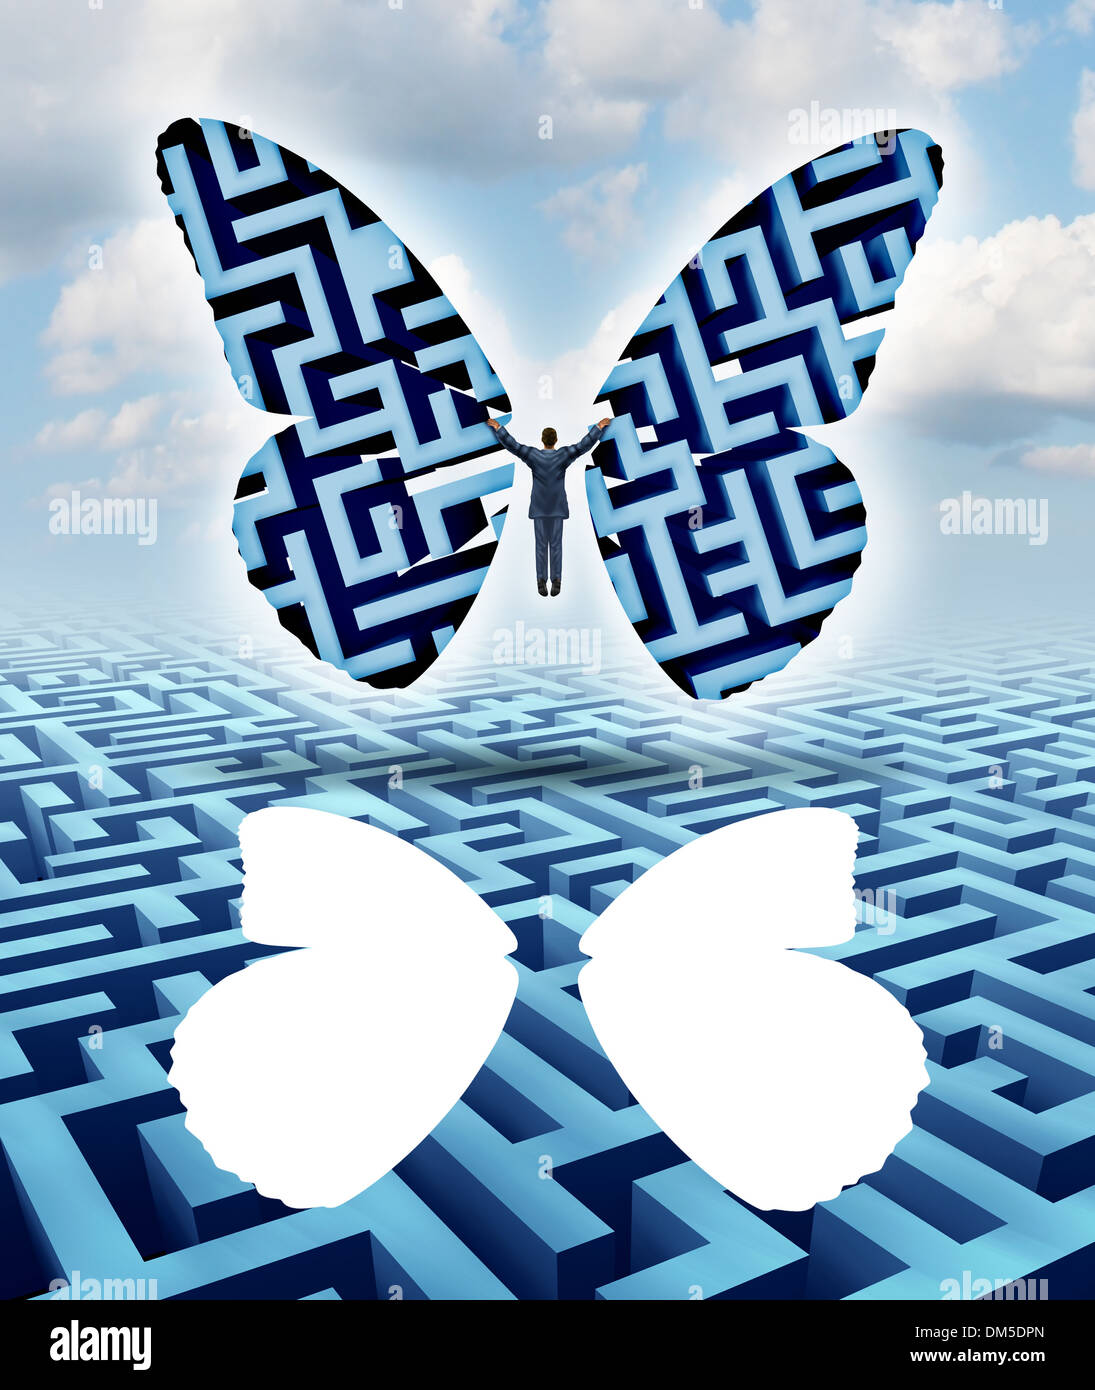 Freedom and creativity as an innovative businessman thinking outside the box escaping a maze or labyrinth by cutting out butterfly wings and taking flight overcoming adversity towards his journey to success. Stock Photo